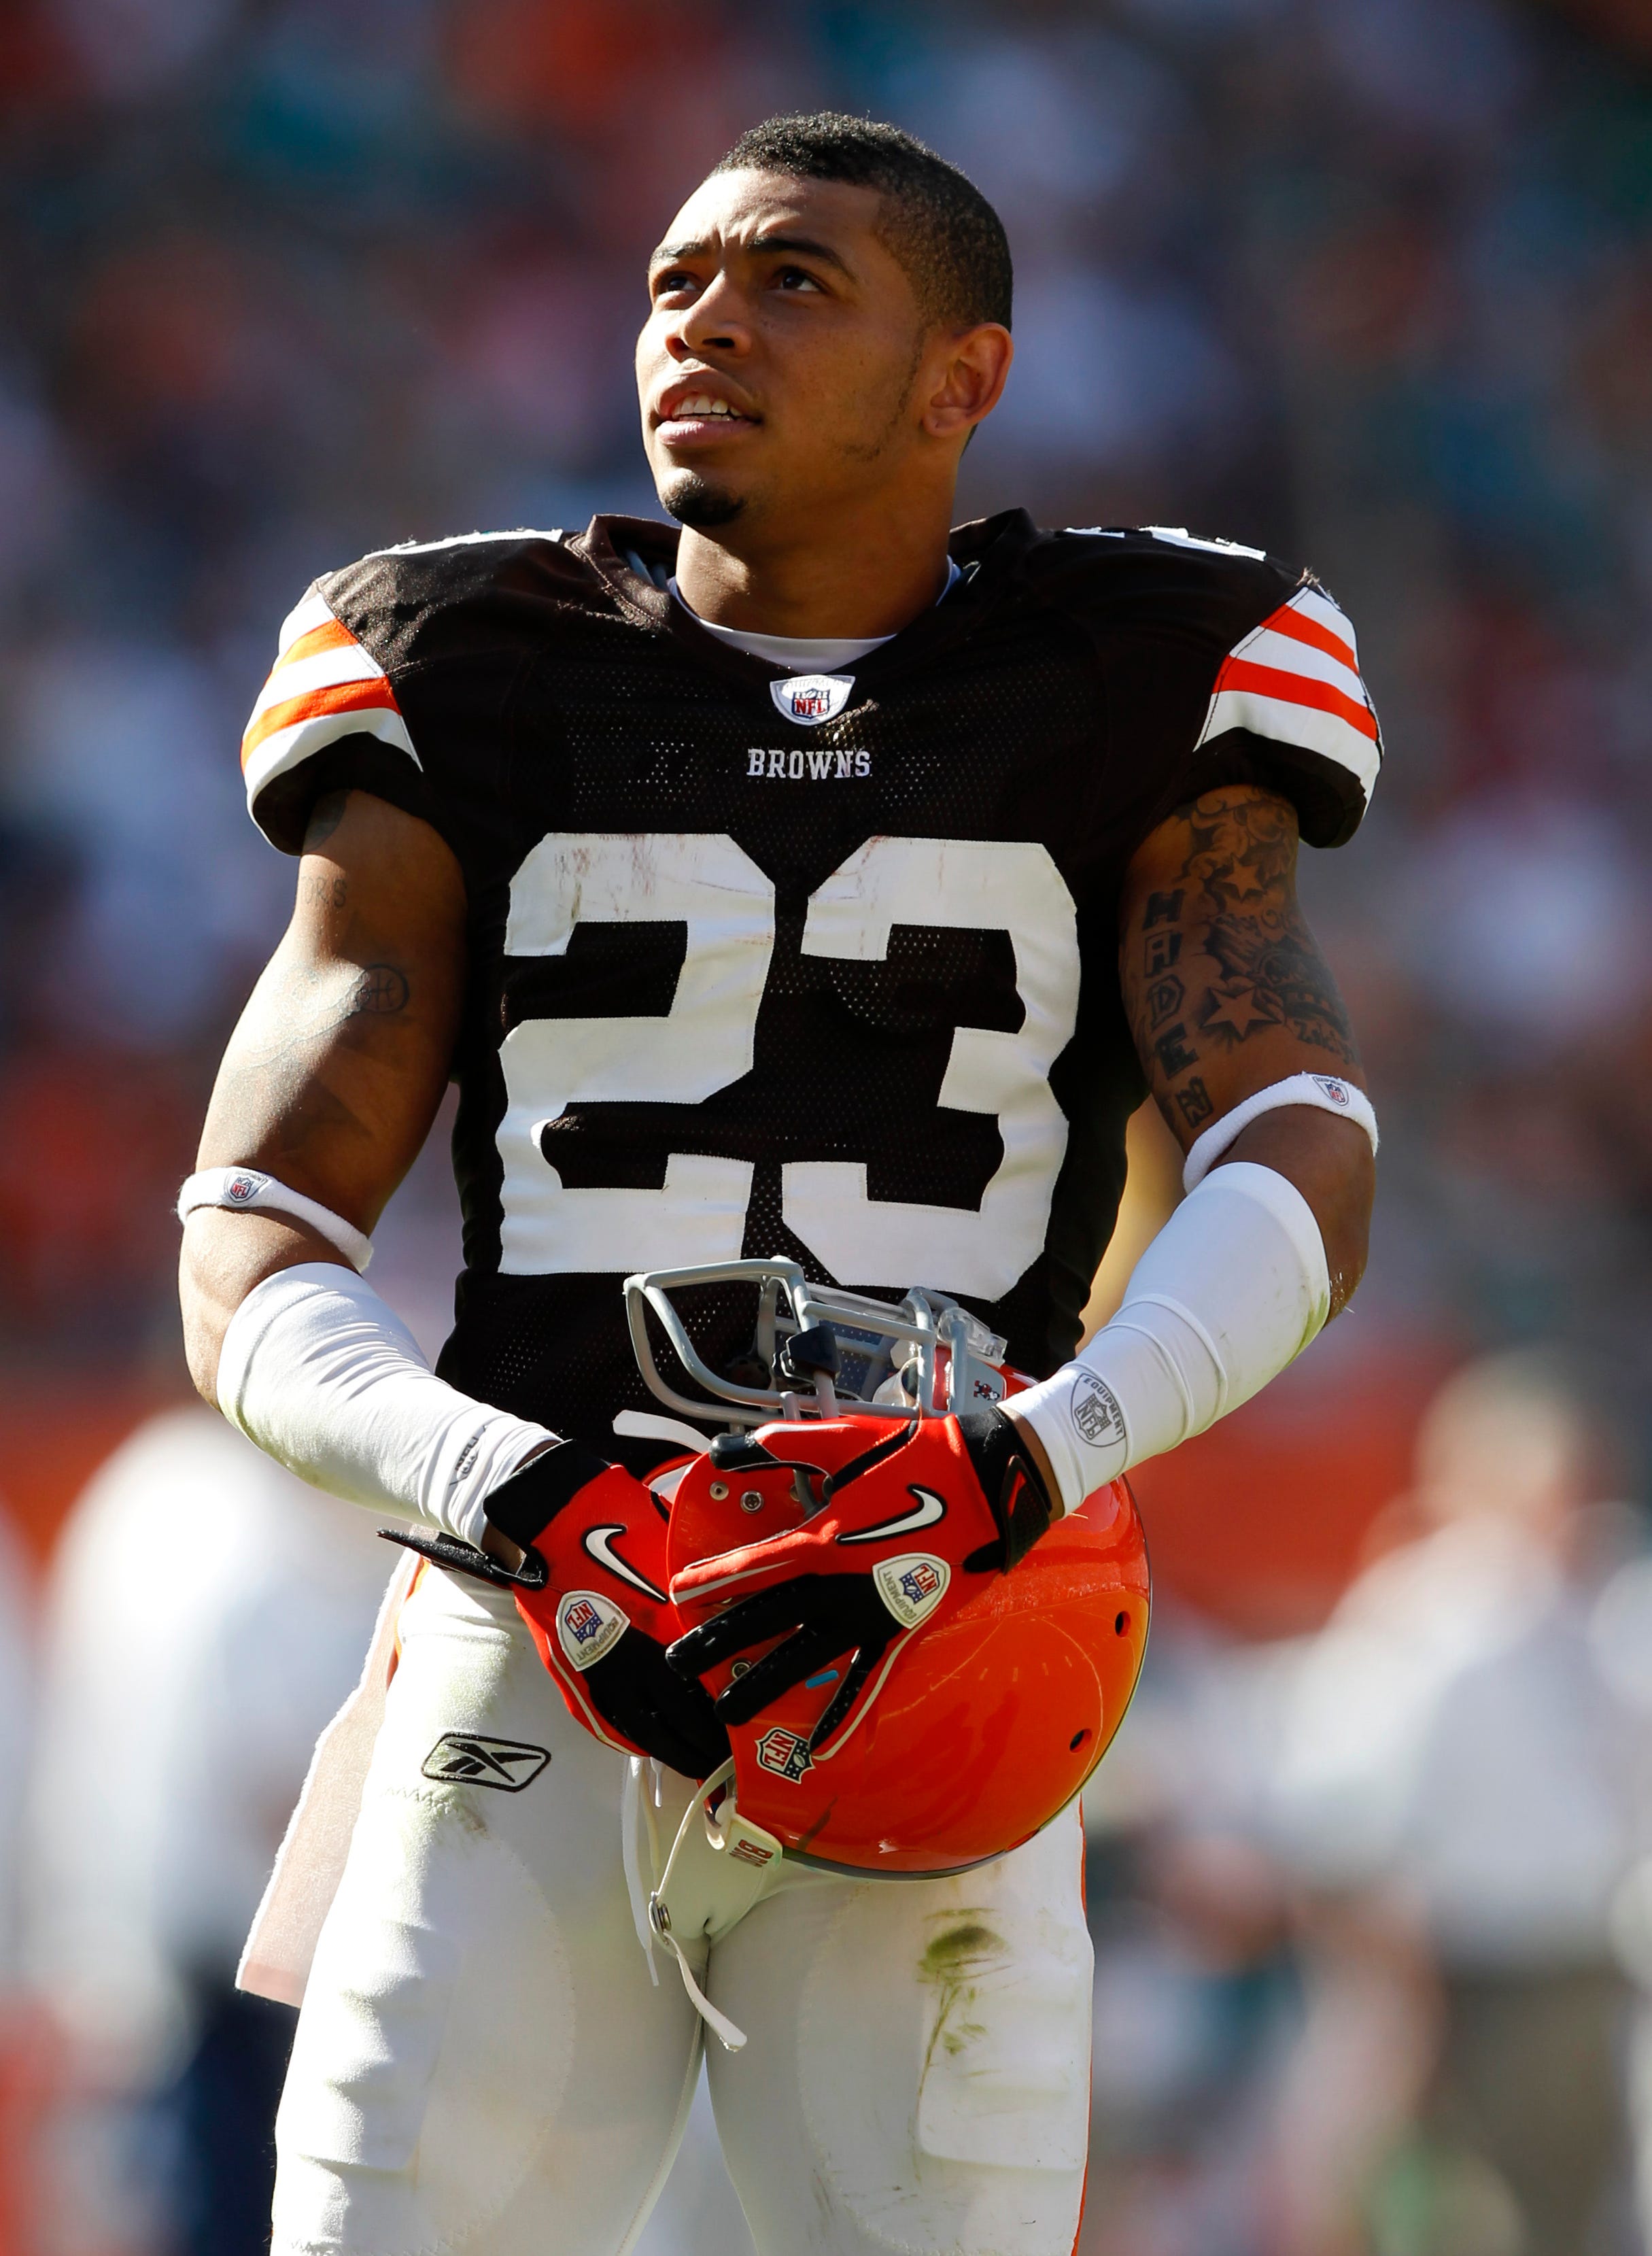 Veteran cornerback Joe Haden to sign one-day deal with Browns before retiring